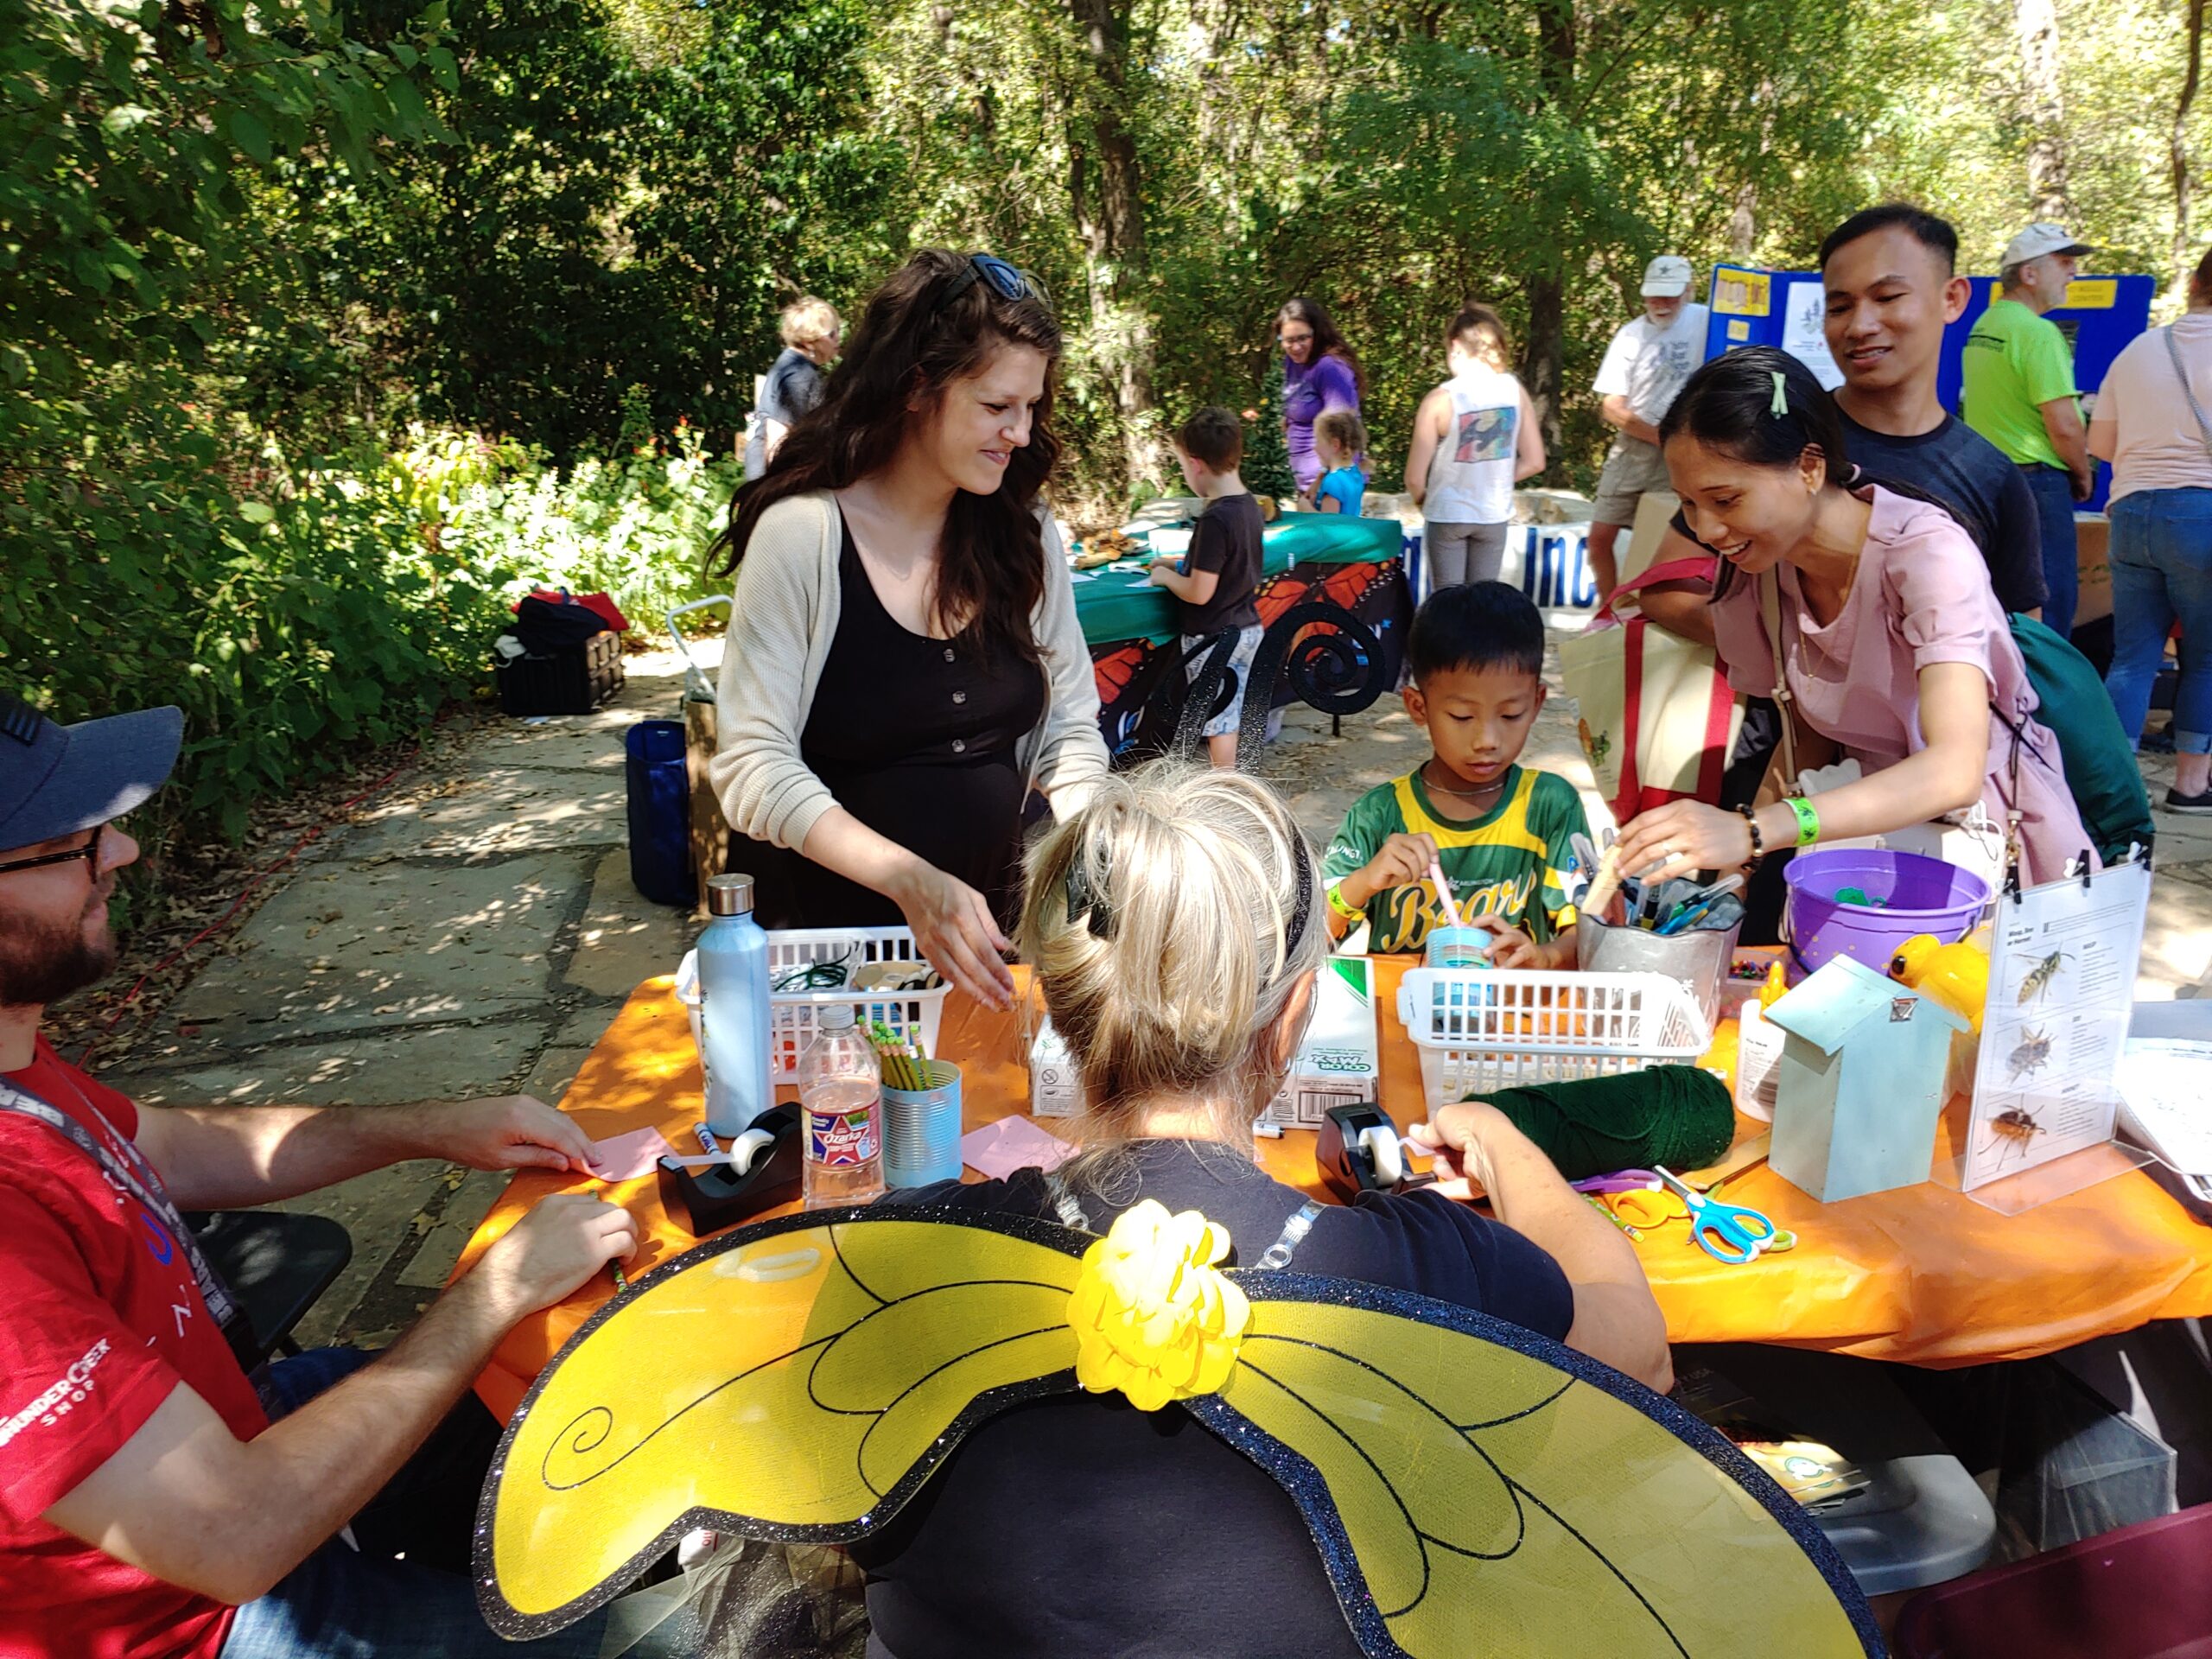 Smiling adults and kids work surround colorful tables outdoors. An adult in a foreground wears large yellow and black wings.